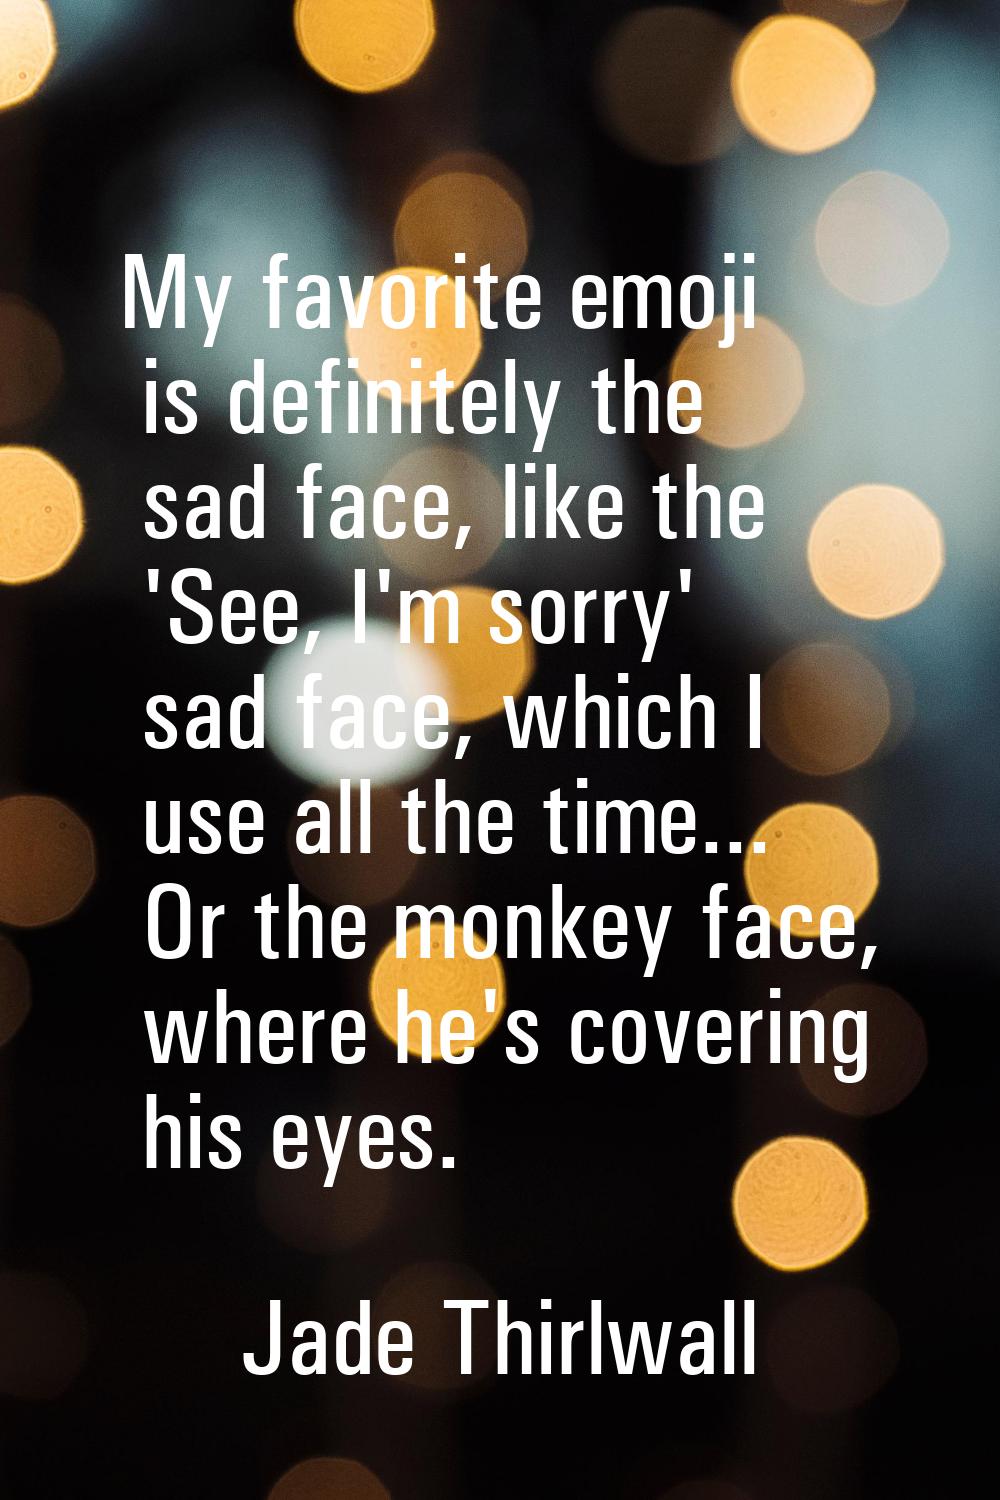 My favorite emoji is definitely the sad face, like the 'See, I'm sorry' sad face, which I use all t